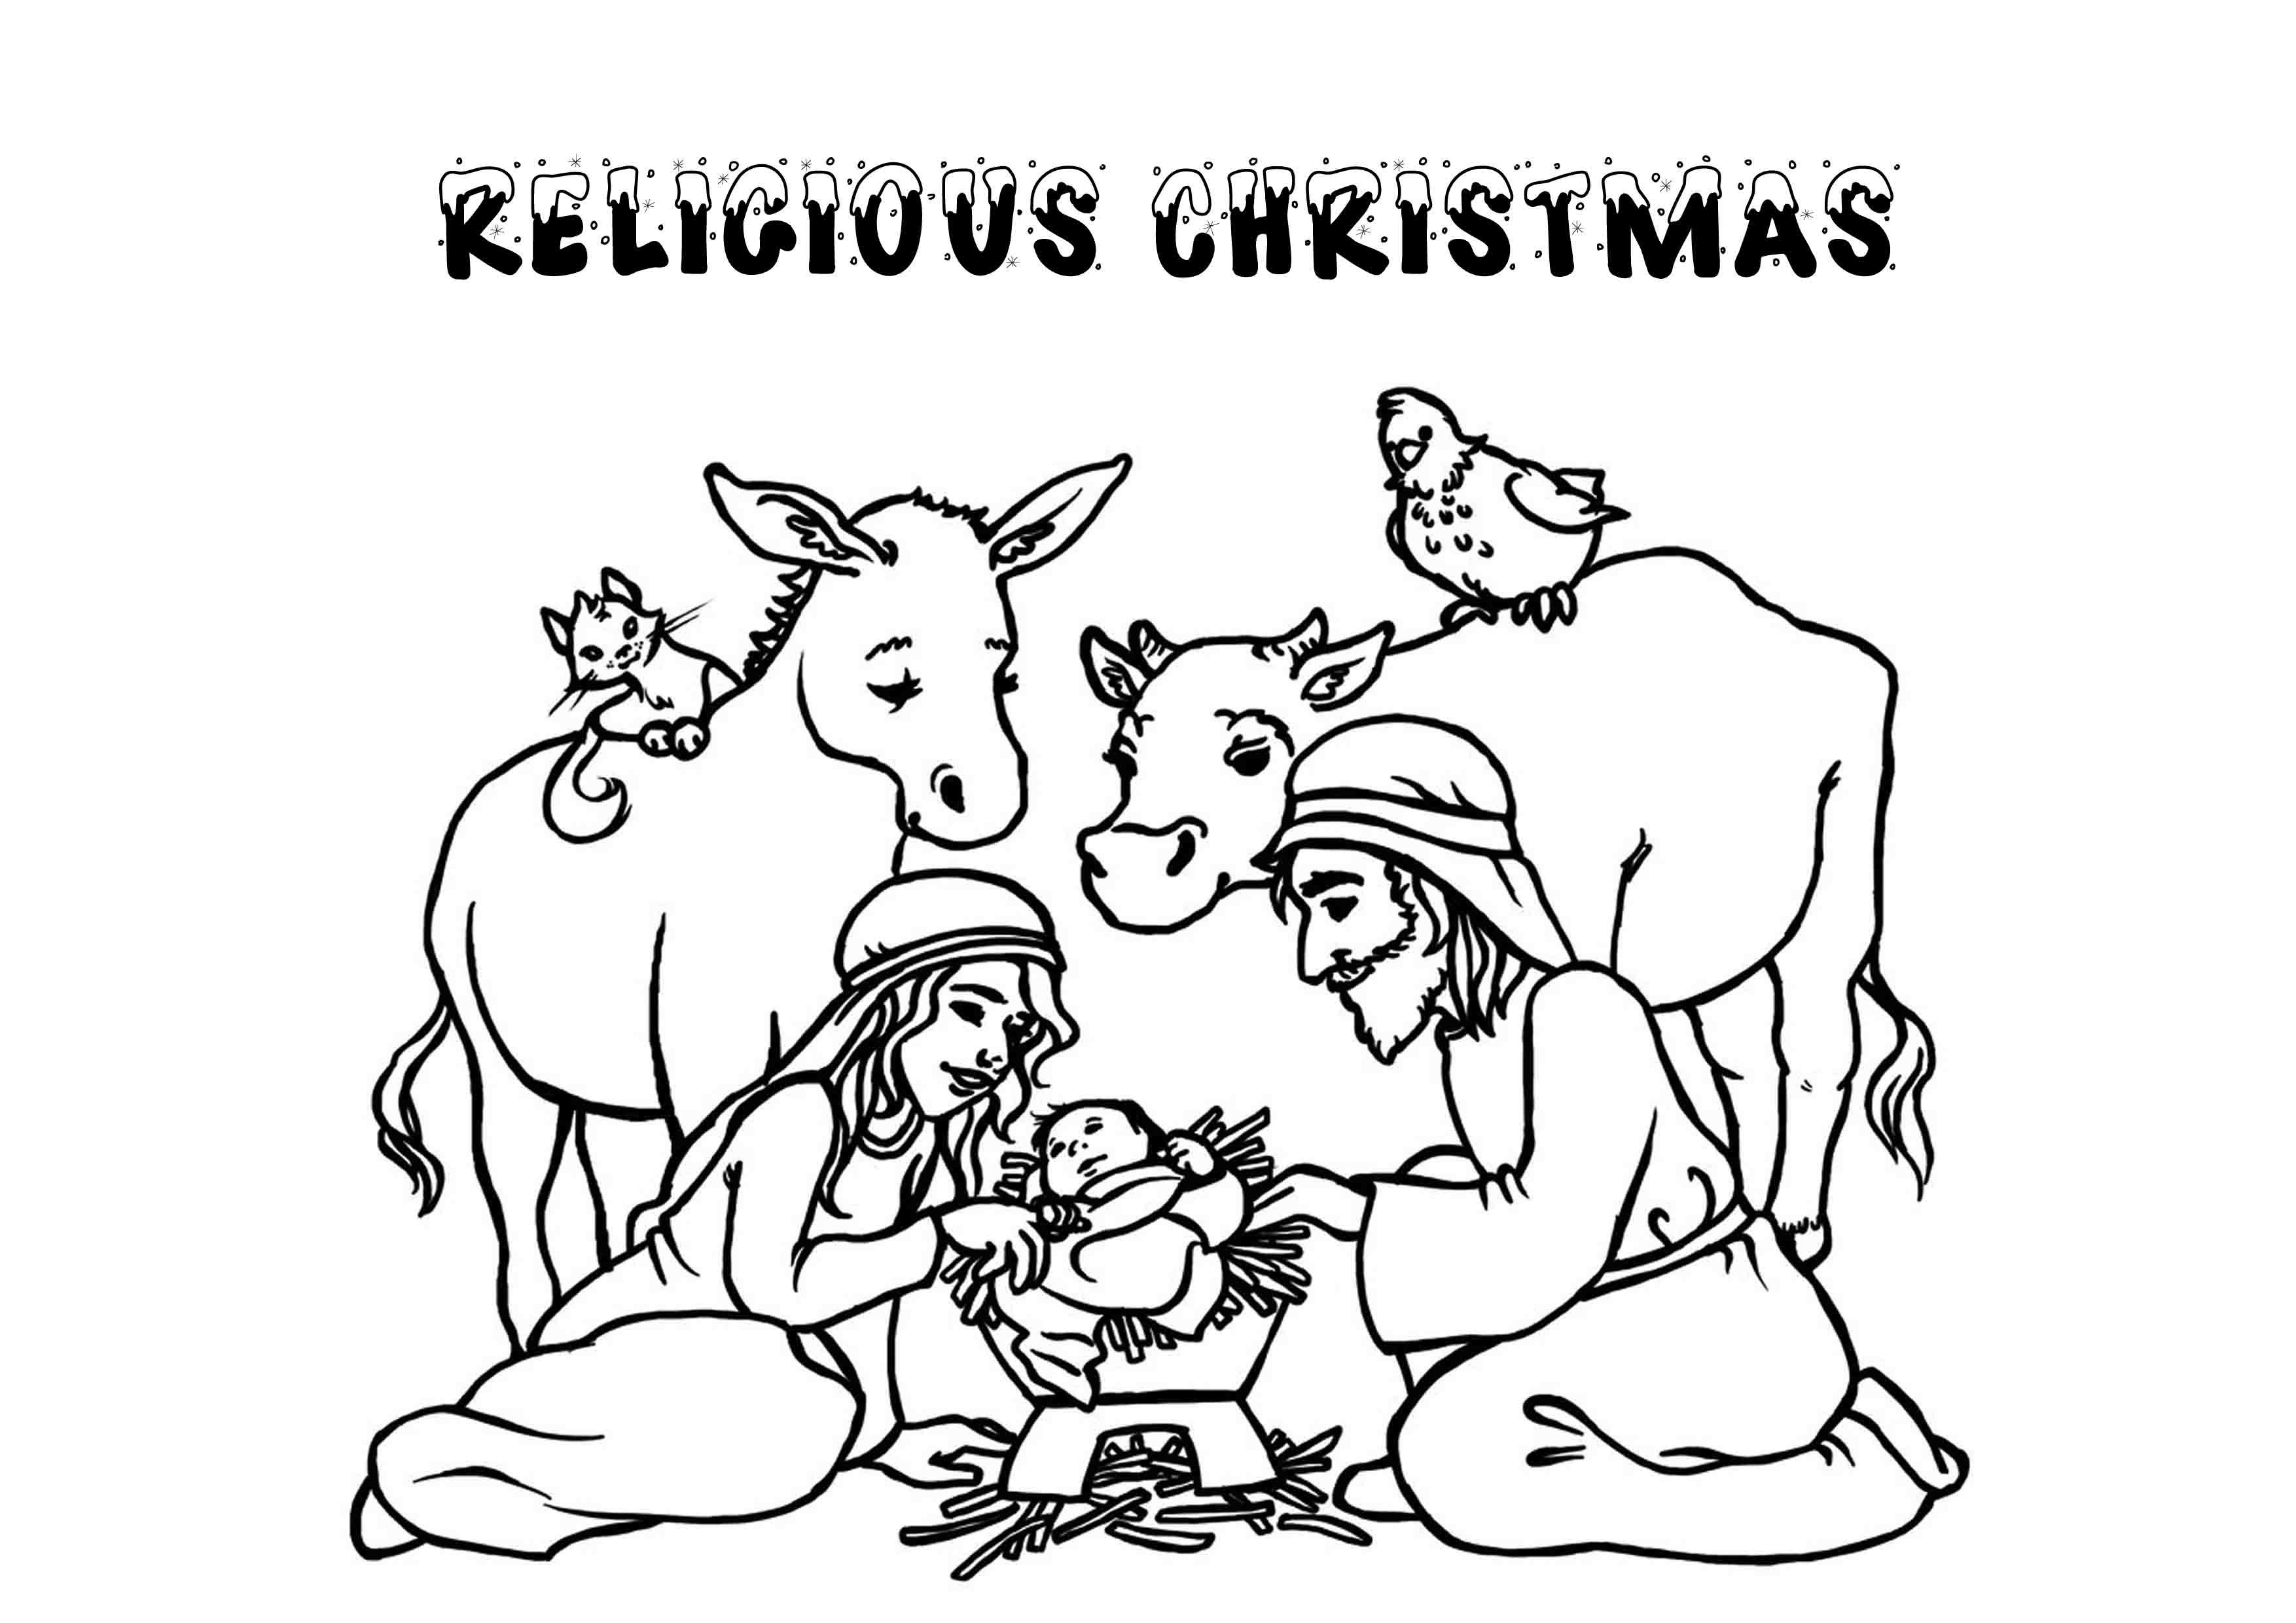 Religious Christmas Coloring Pages For Kids at GetDrawings